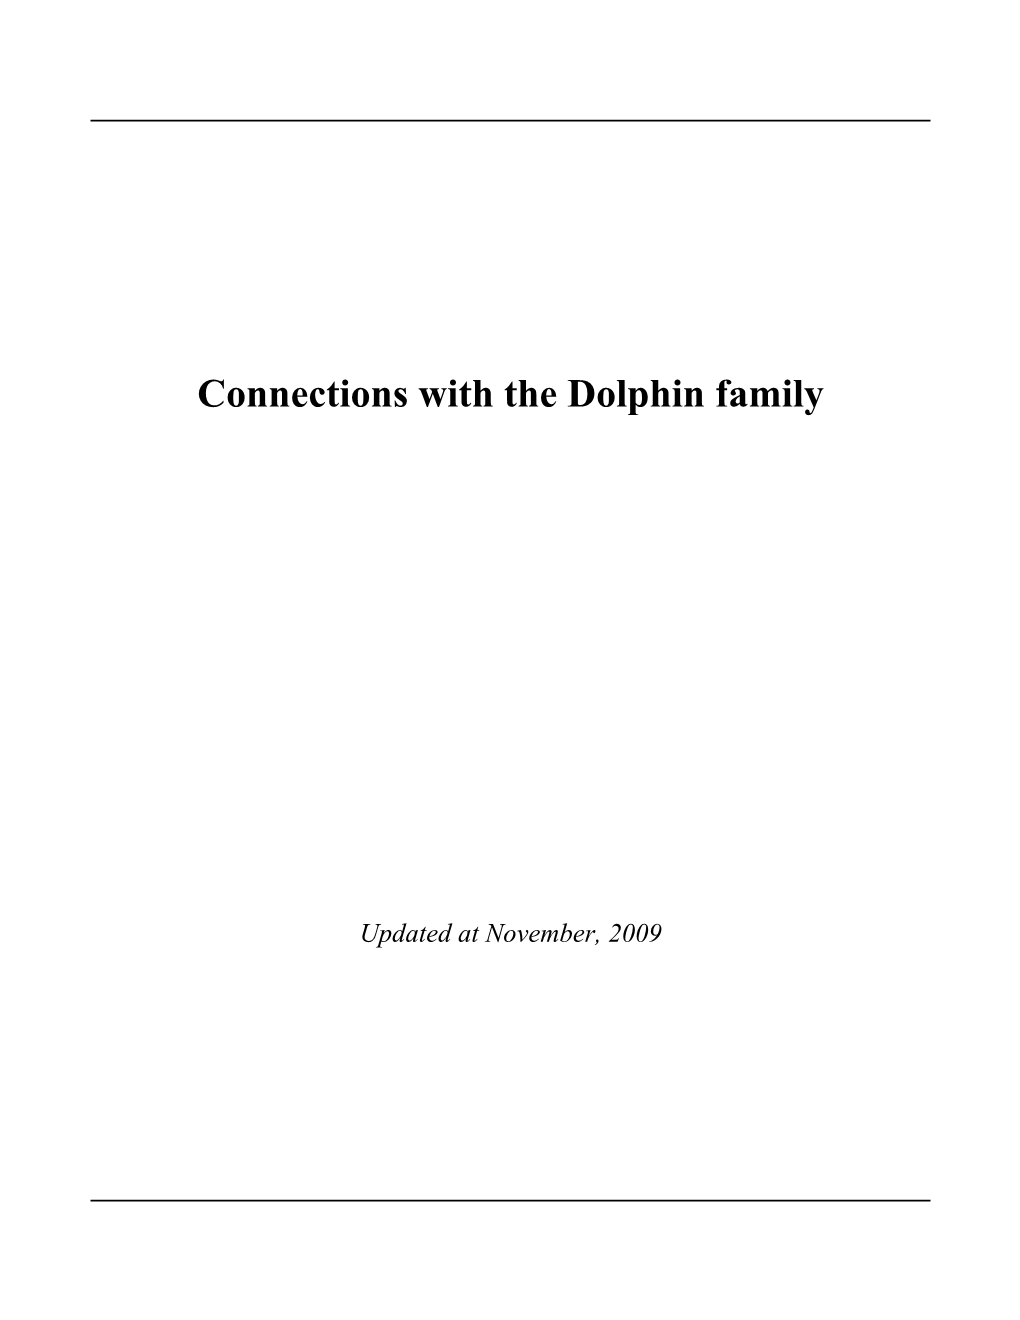 Connections with the Dolphin Family